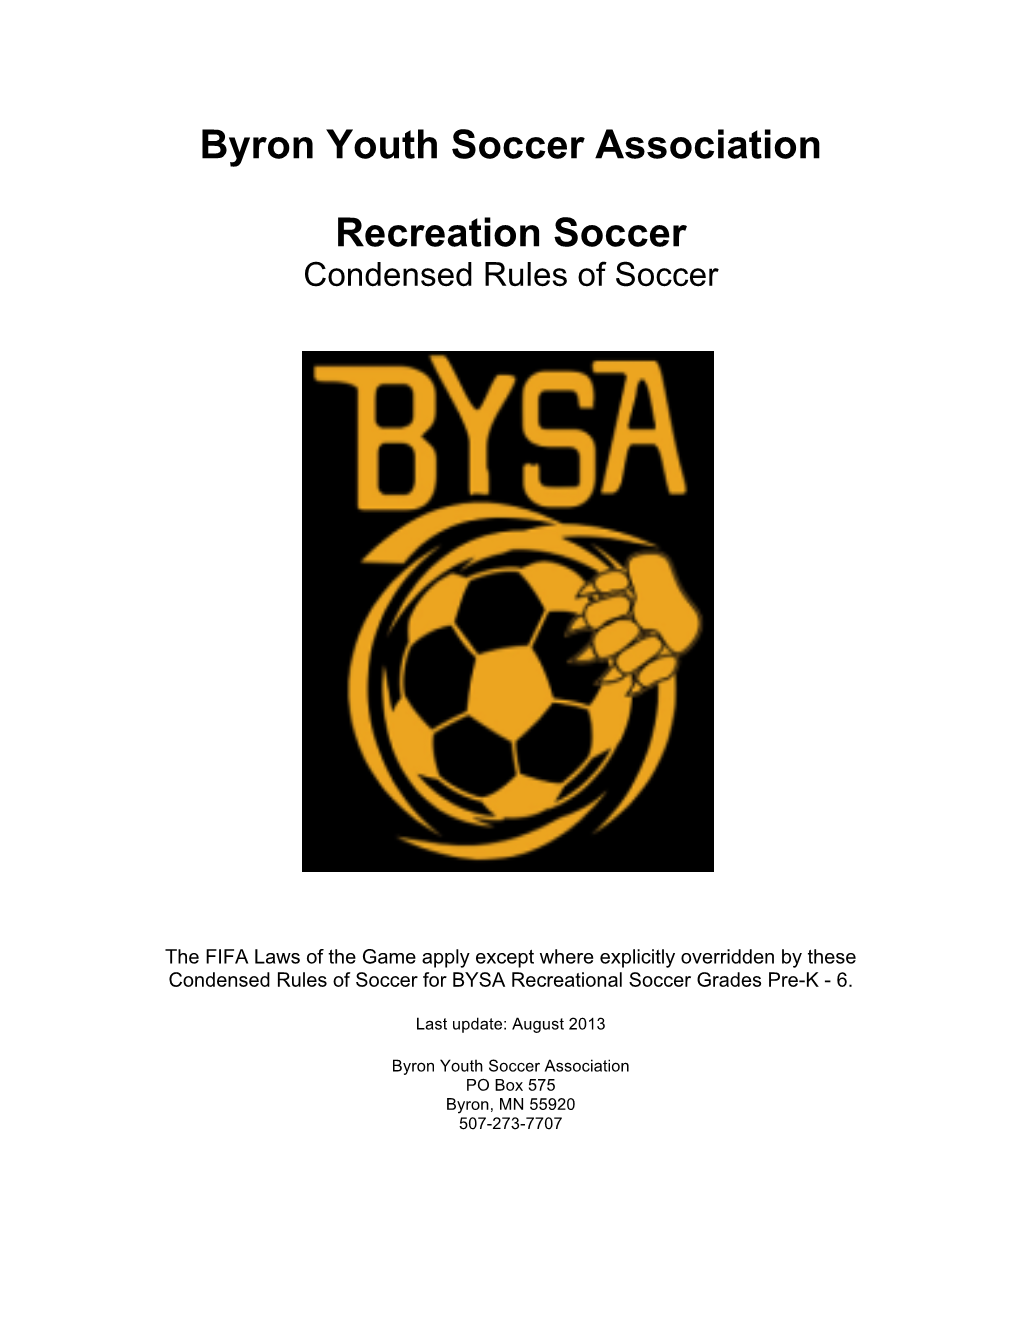 BYSA Rules of Soccer